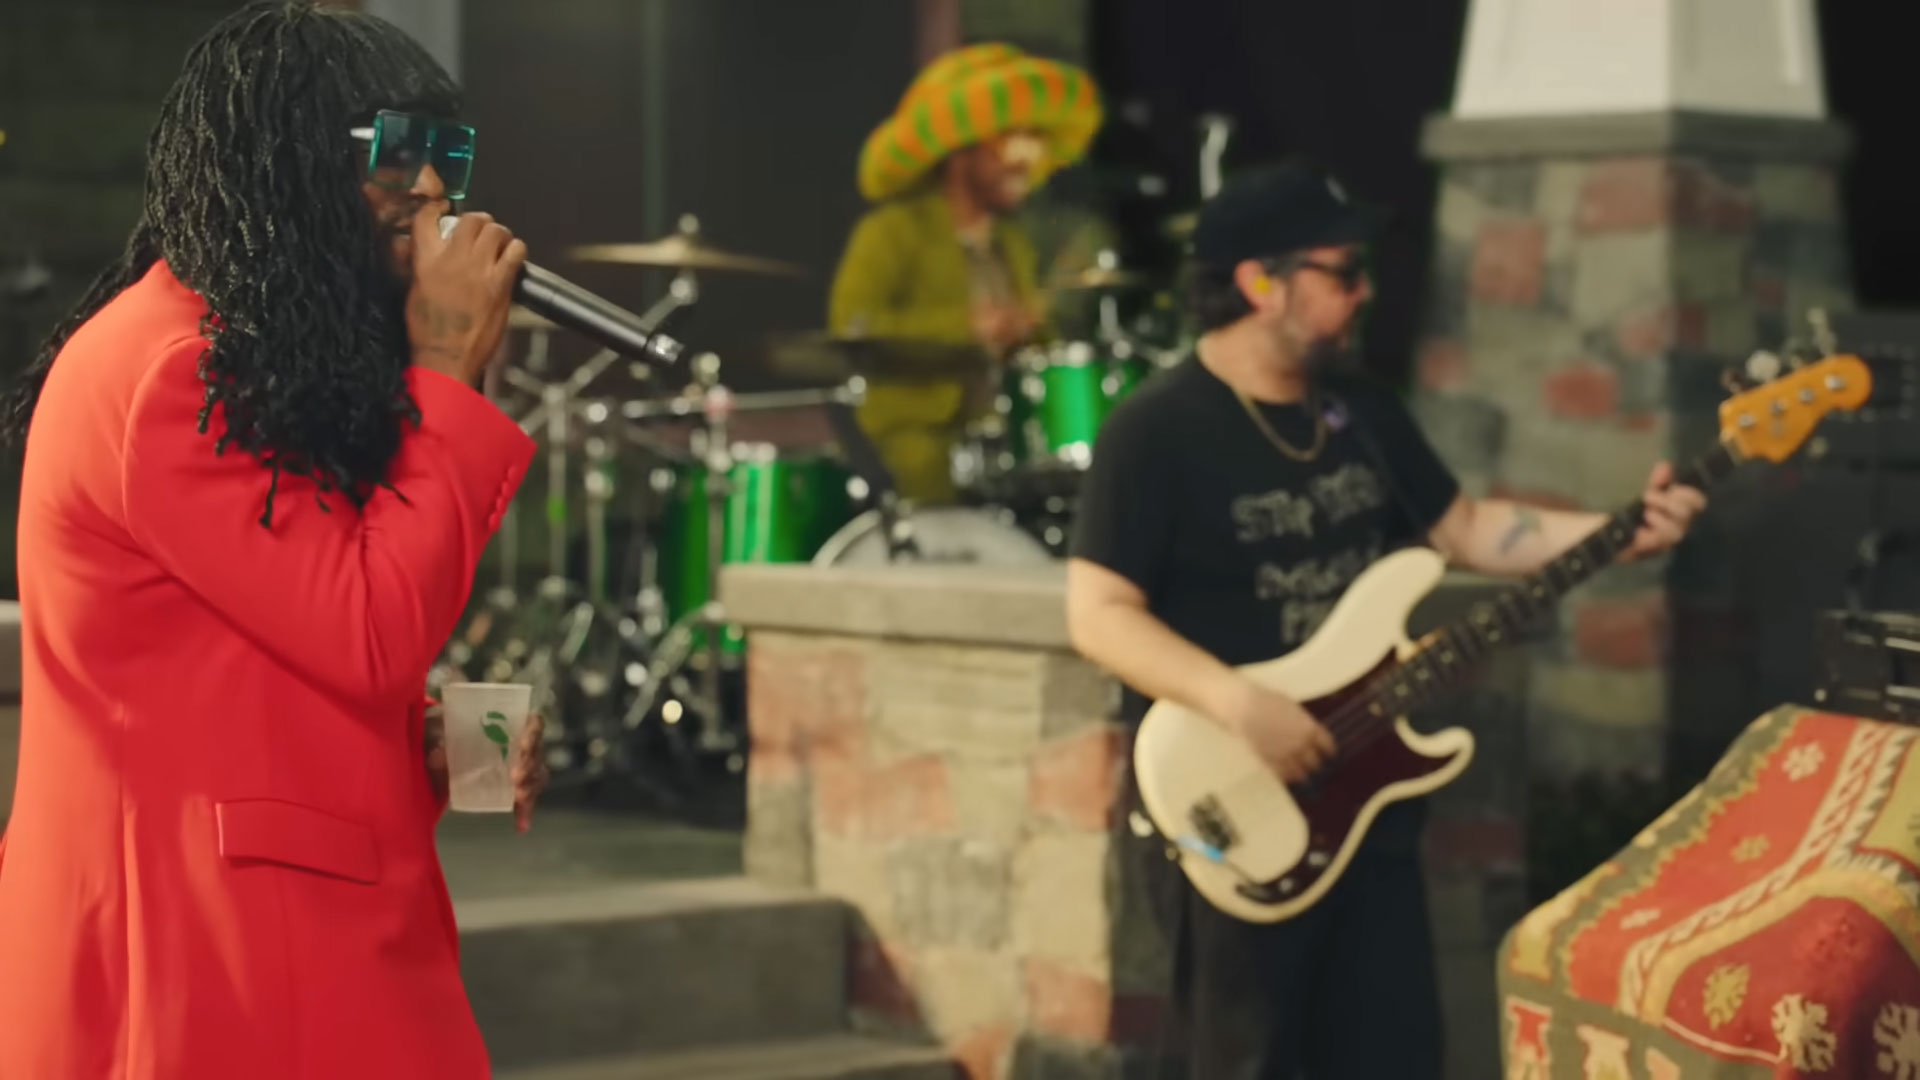 Anderson .Paak: Am I Wrong (Live Performance with ScHoolboy Q) #ScHoolboyQ